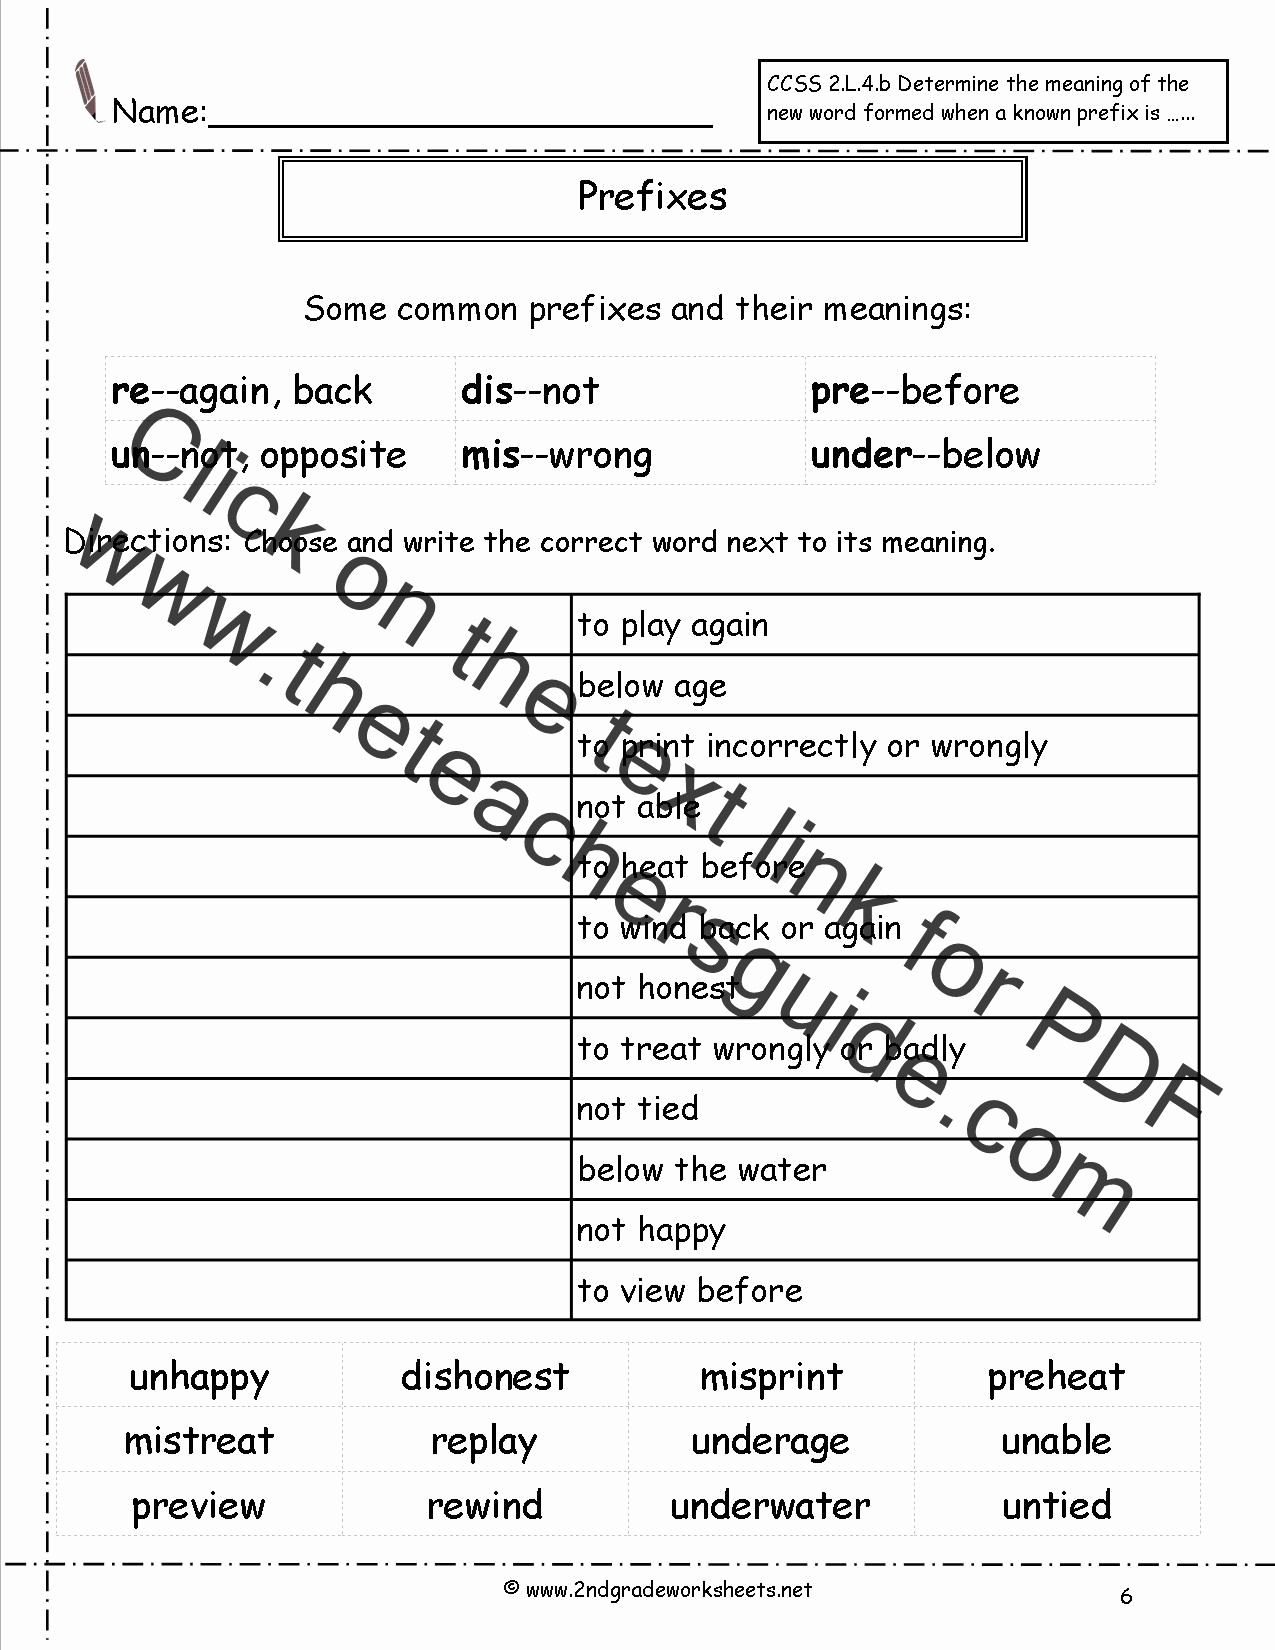 Suffix Worksheets 4th Grade Unique 20 Suffix Worksheets for 4th Grade